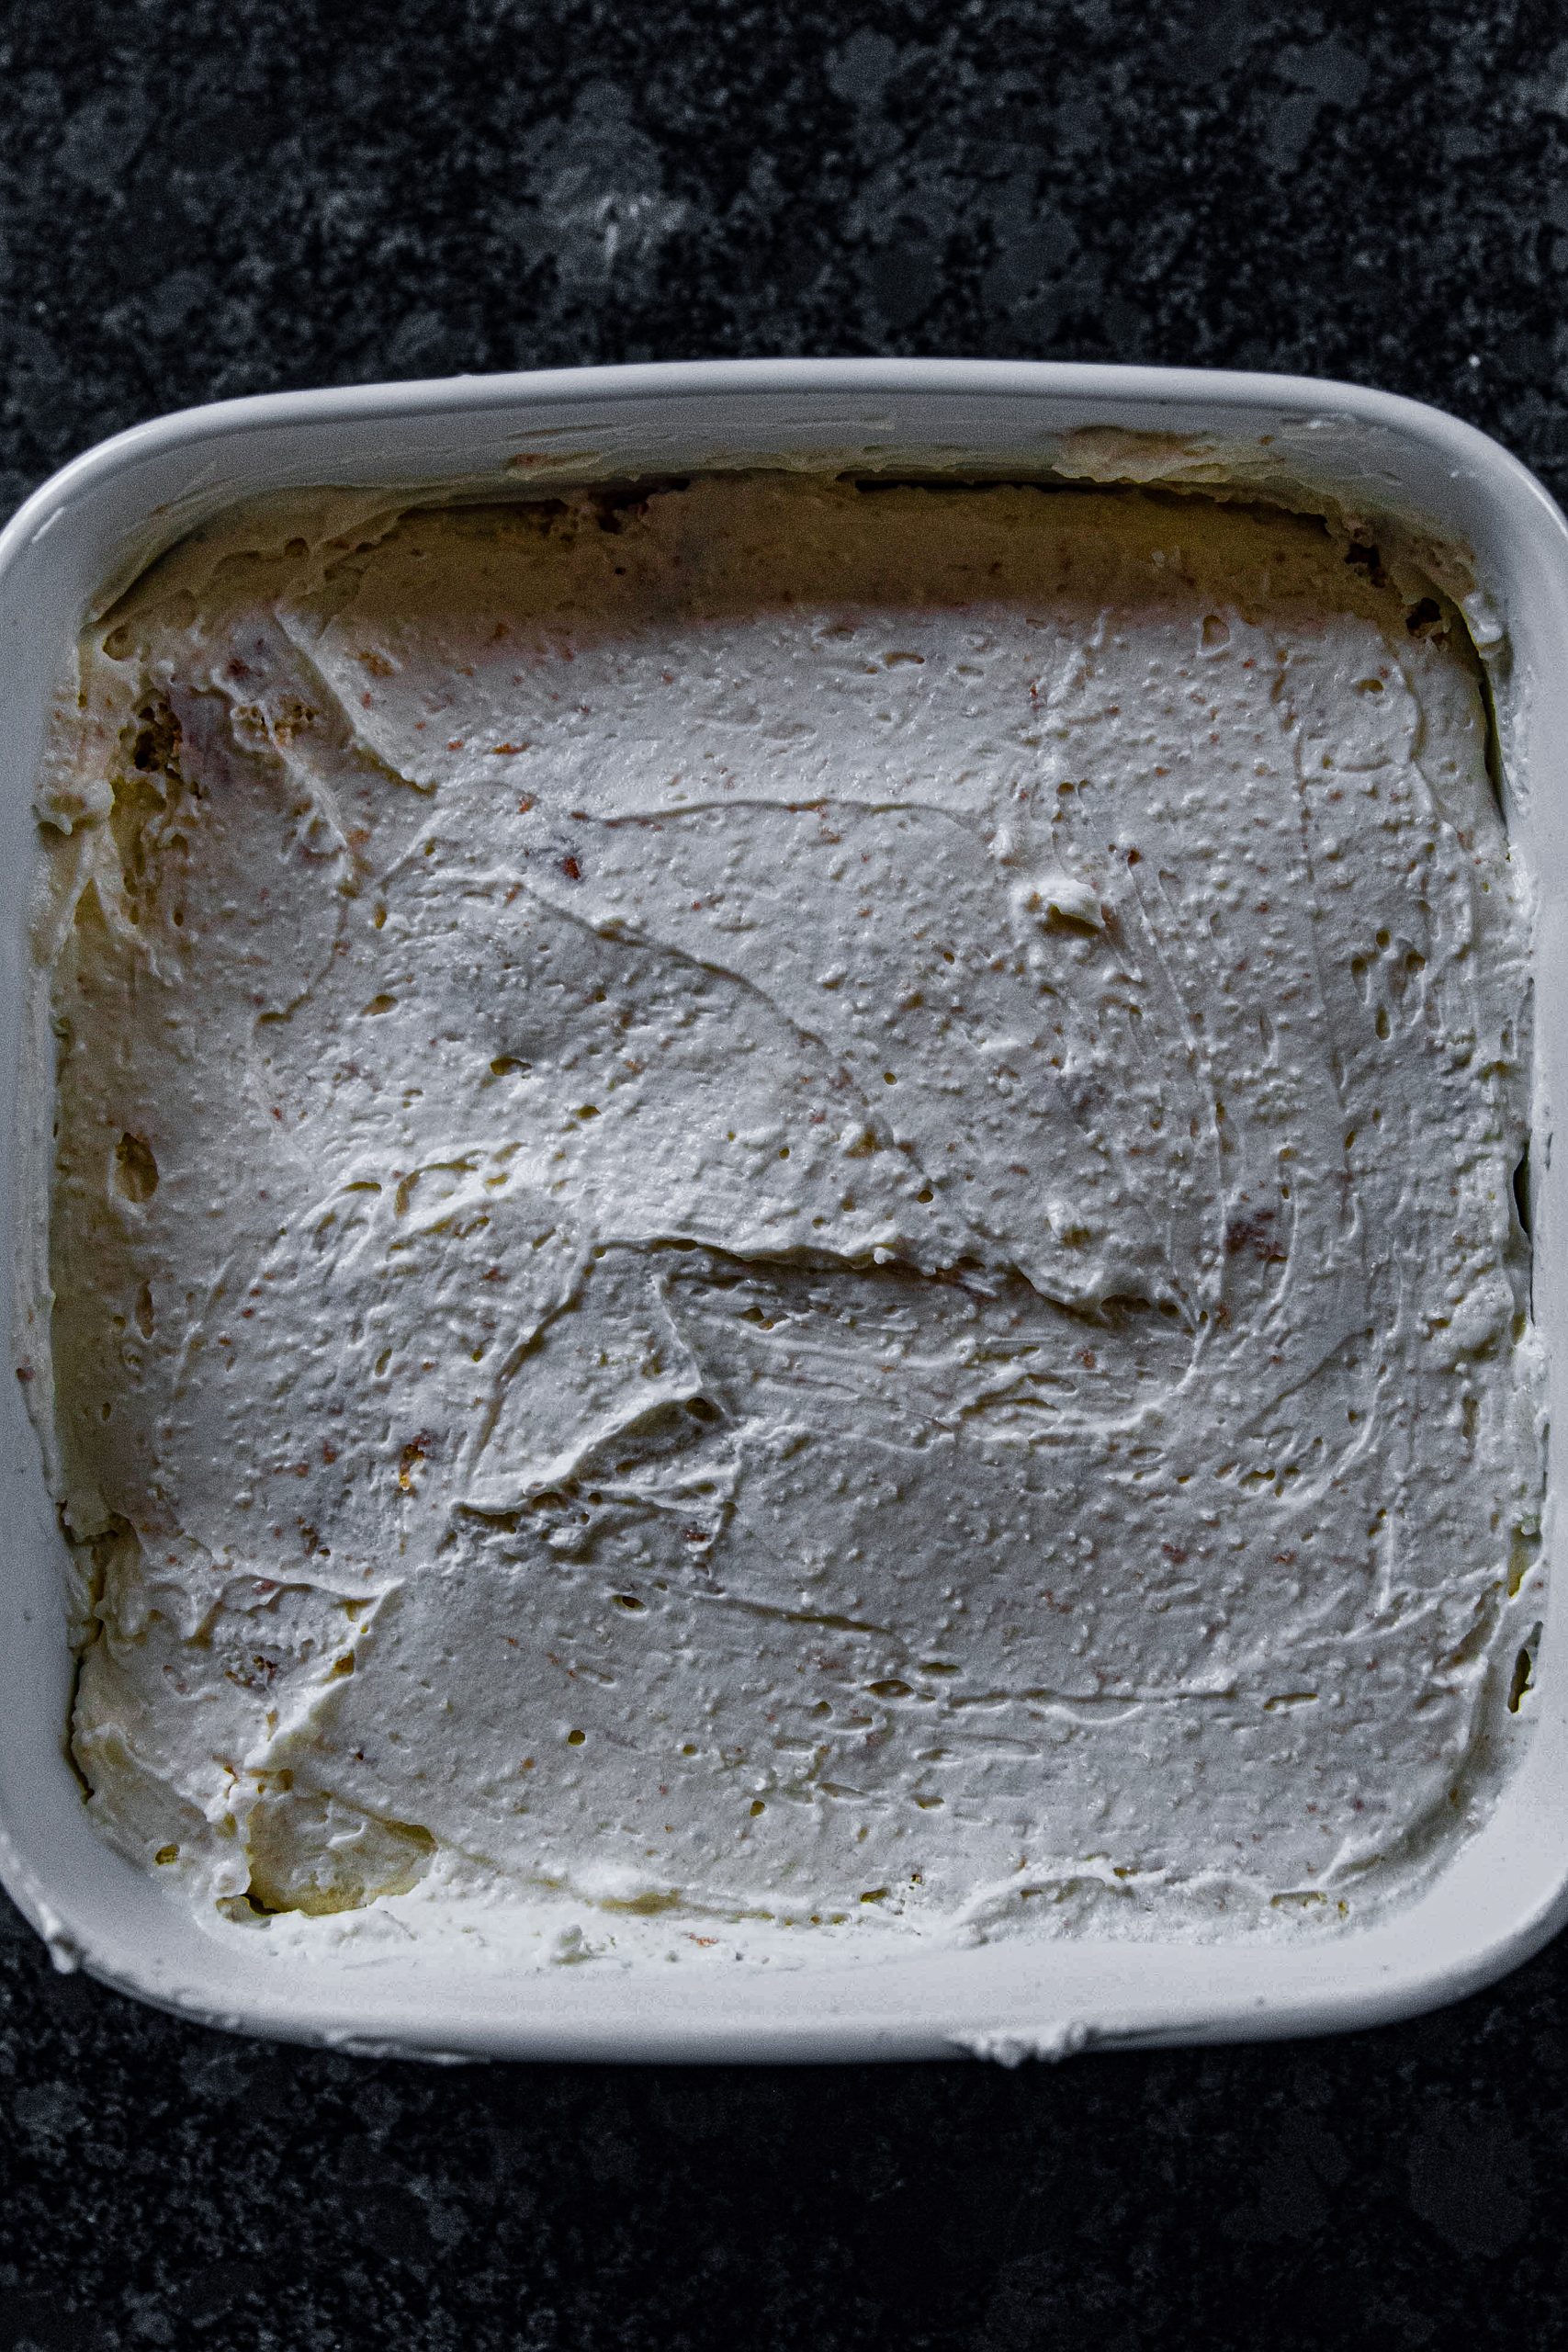 Add your cream cheese mixture  into the crumbled cake and spread it in an even layer on top of the crumbled cake